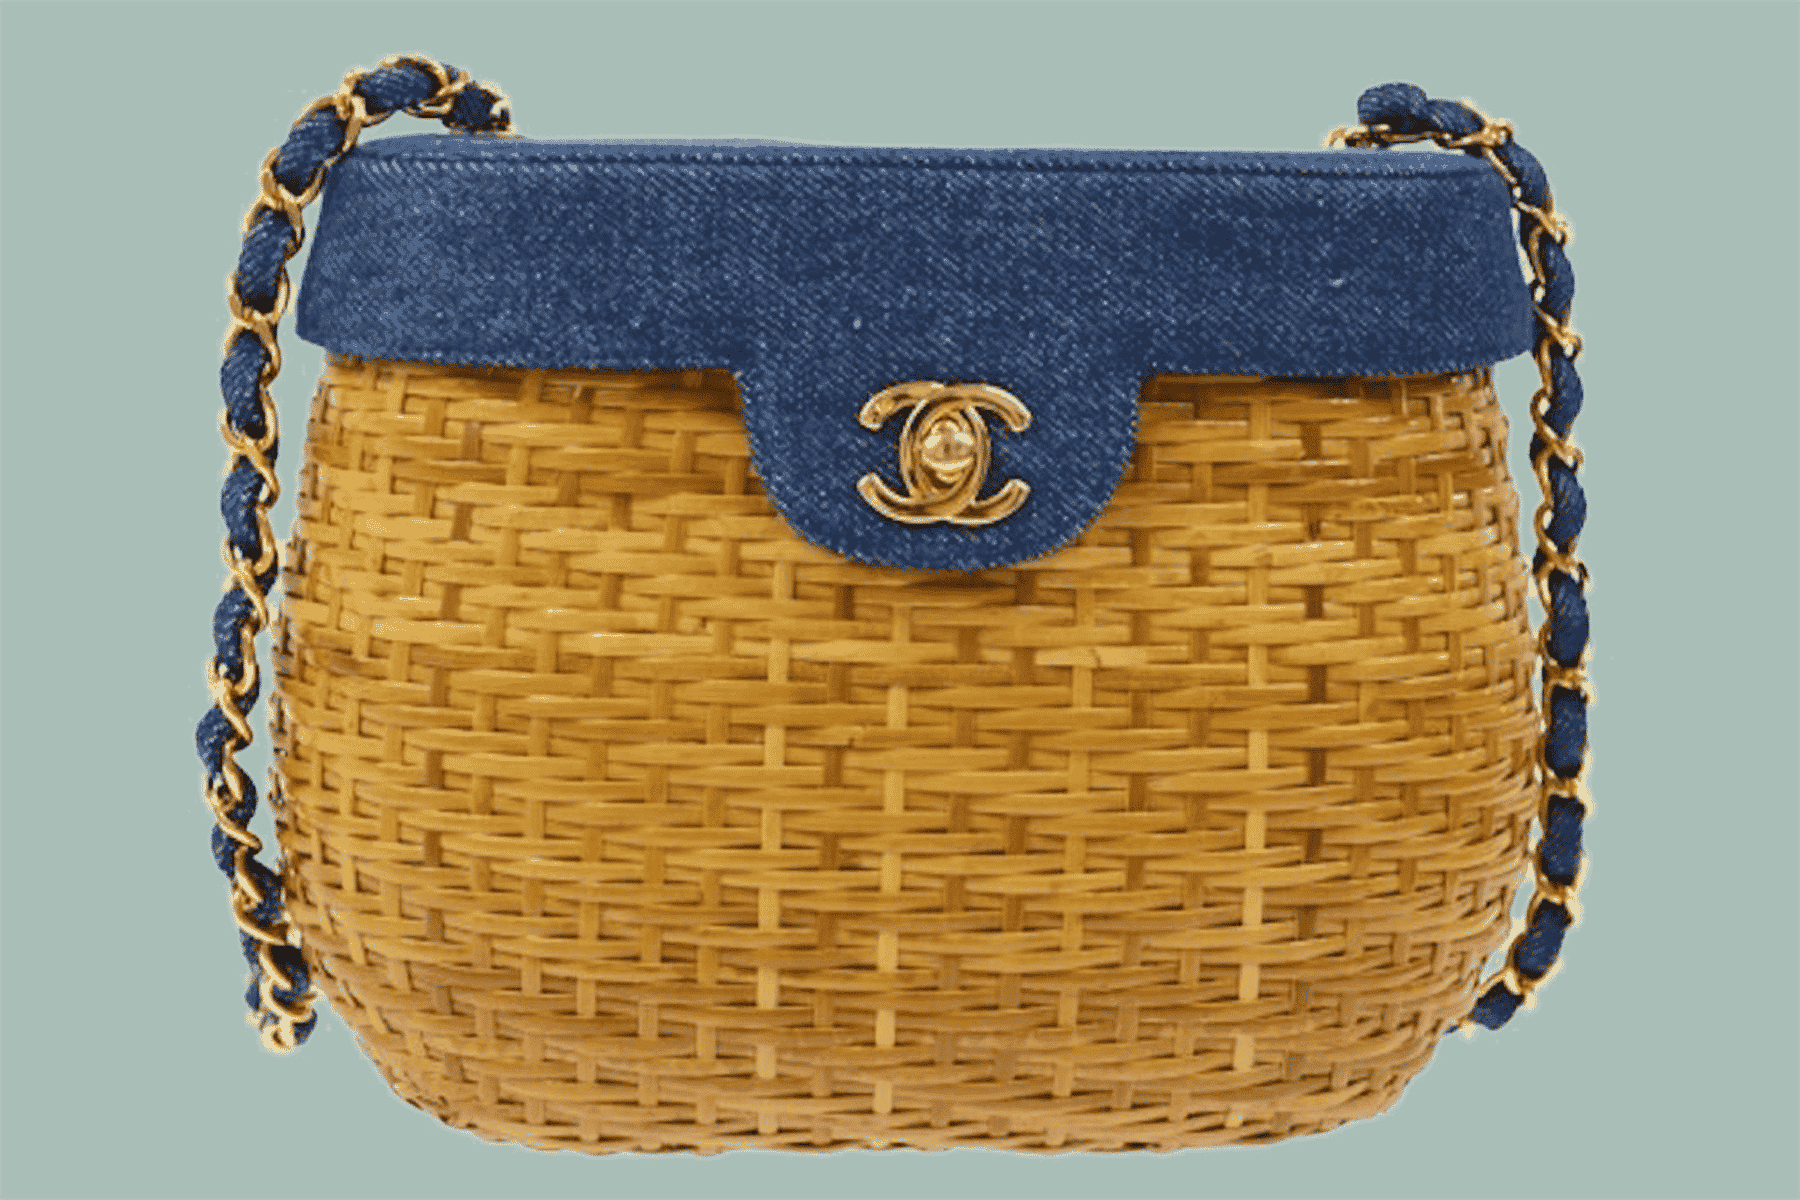 A Chanel Wicker Handbag Gives Impossibly Chic Picnic Vibes - The Study